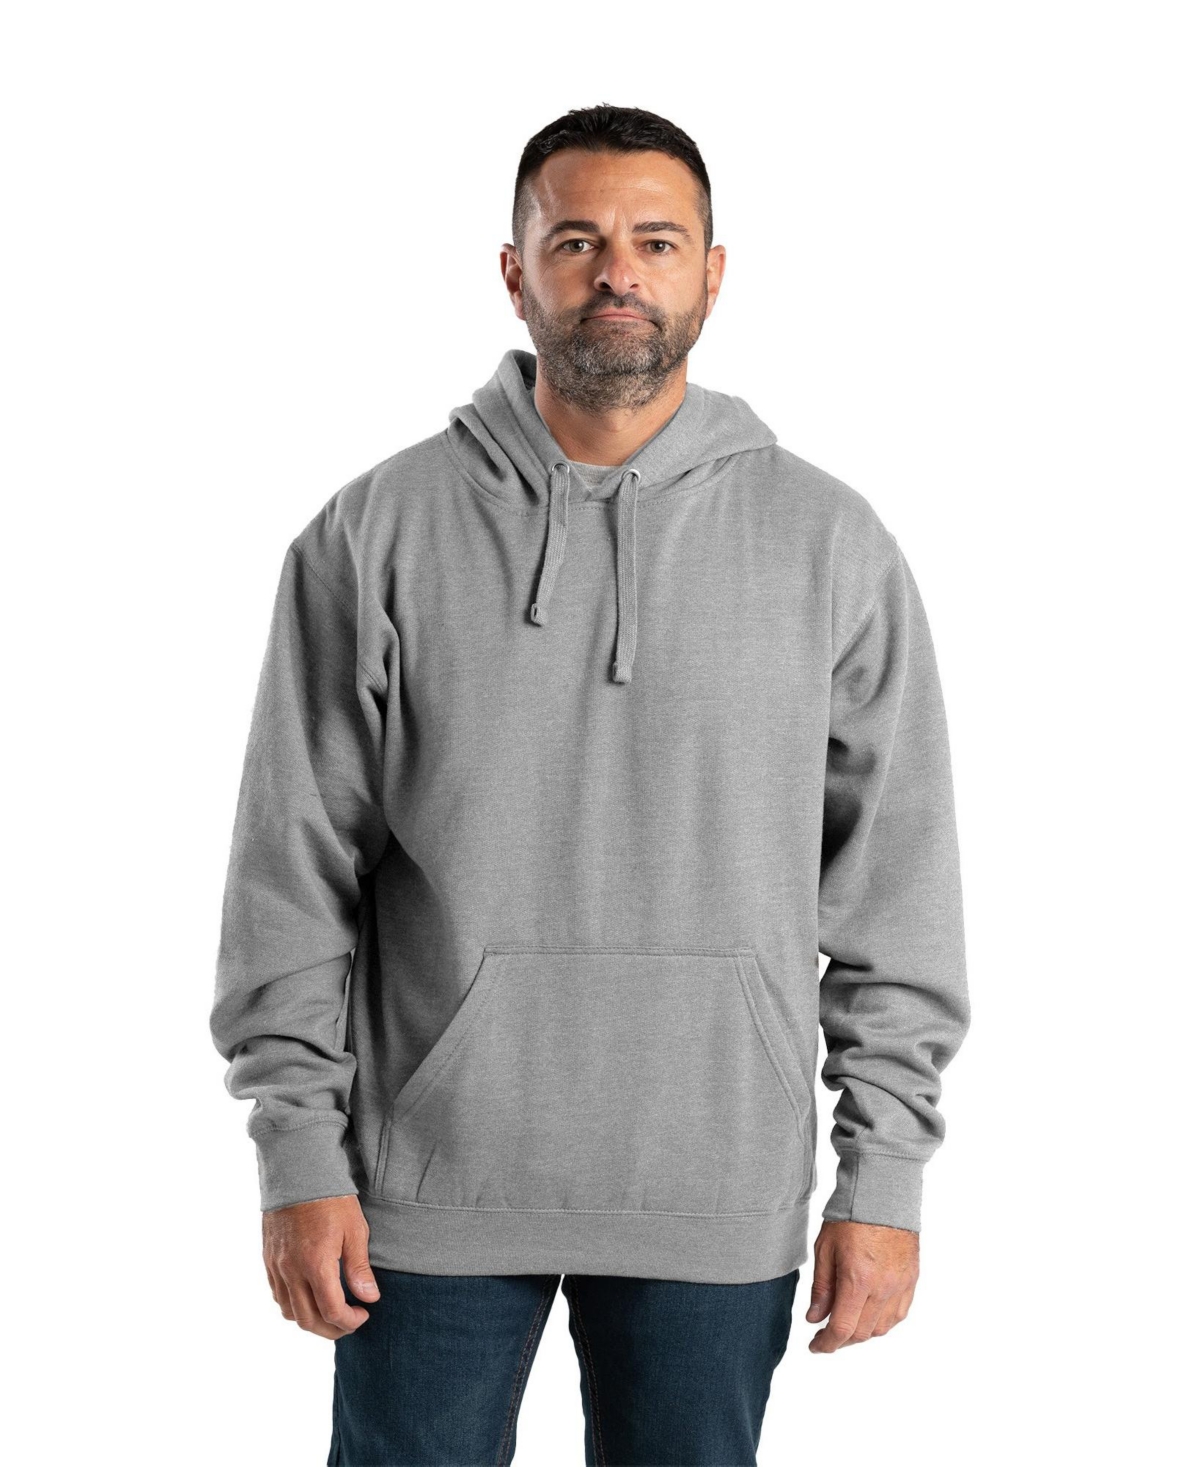 Men's Signature Sleeve Hooded Pullover - Grey